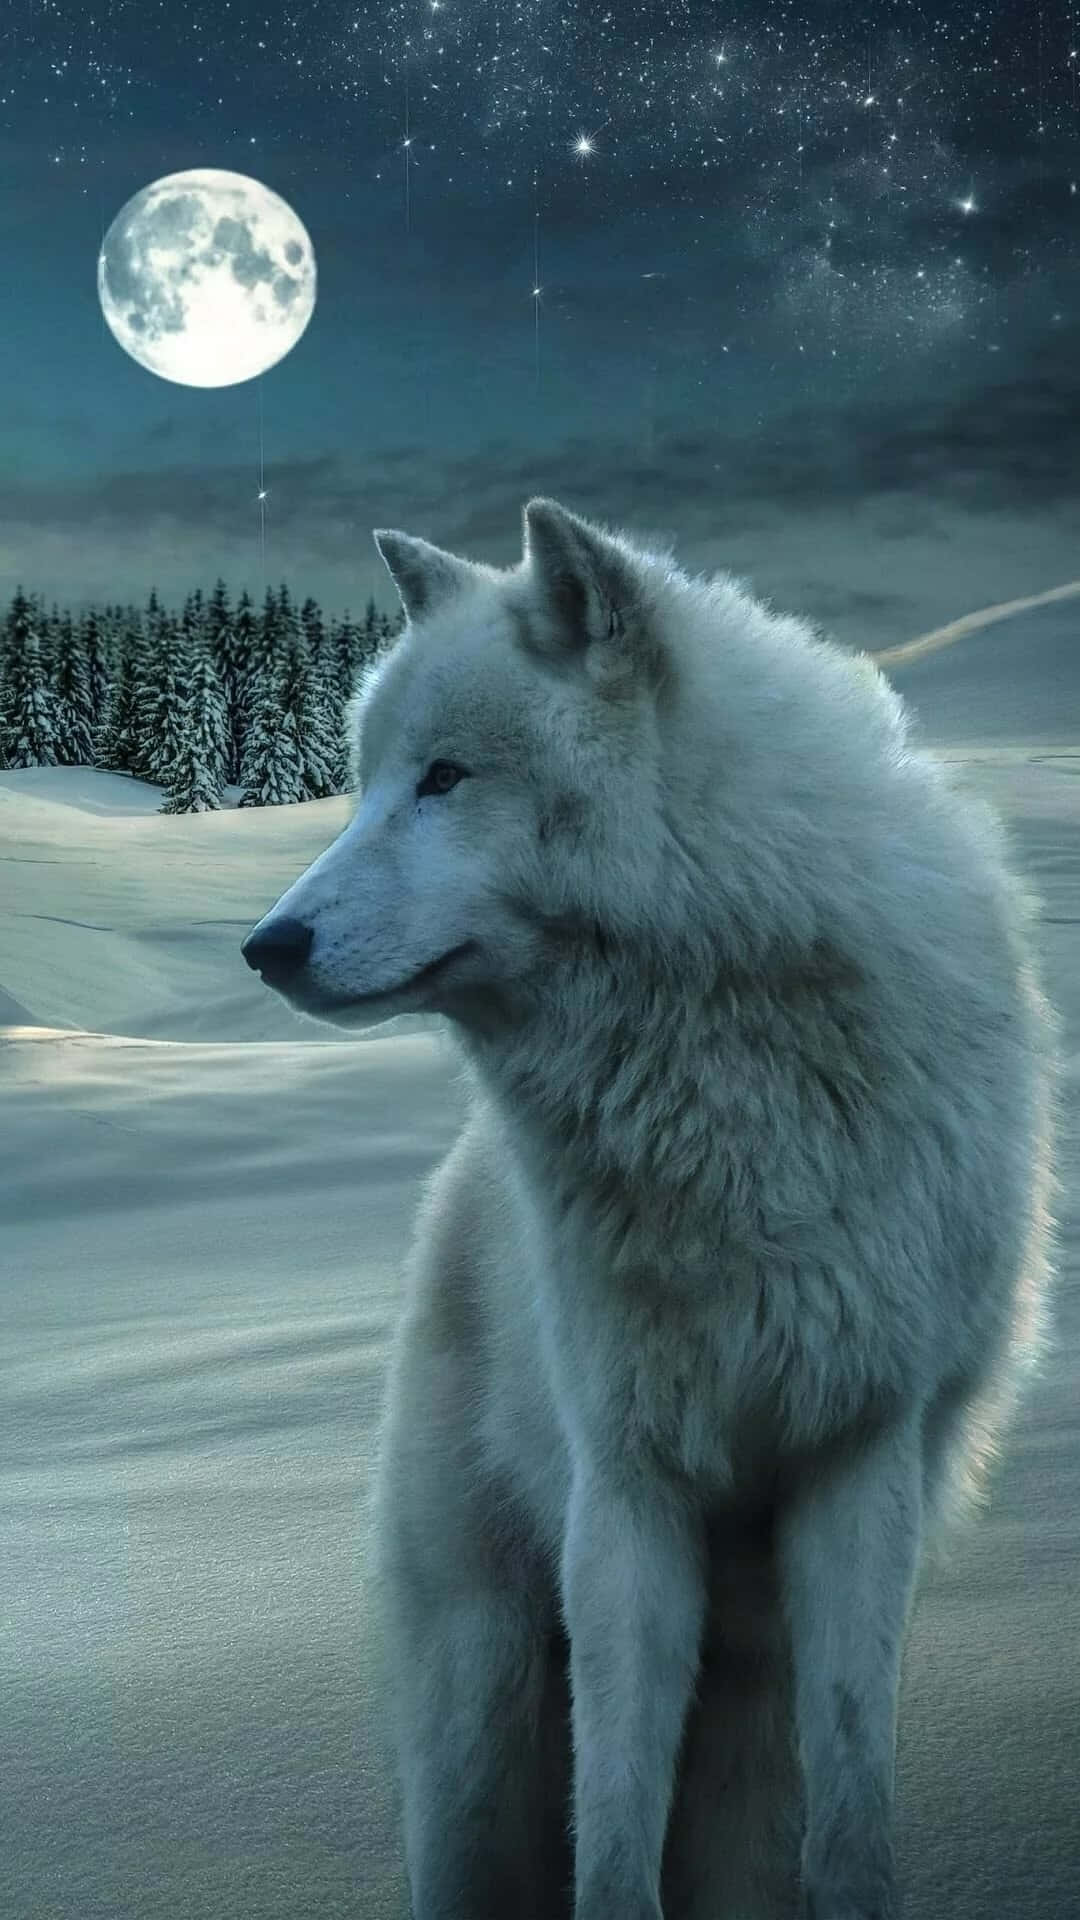 Caption: Majestic Arctic Wolf in a Snowy Landscape Wallpaper